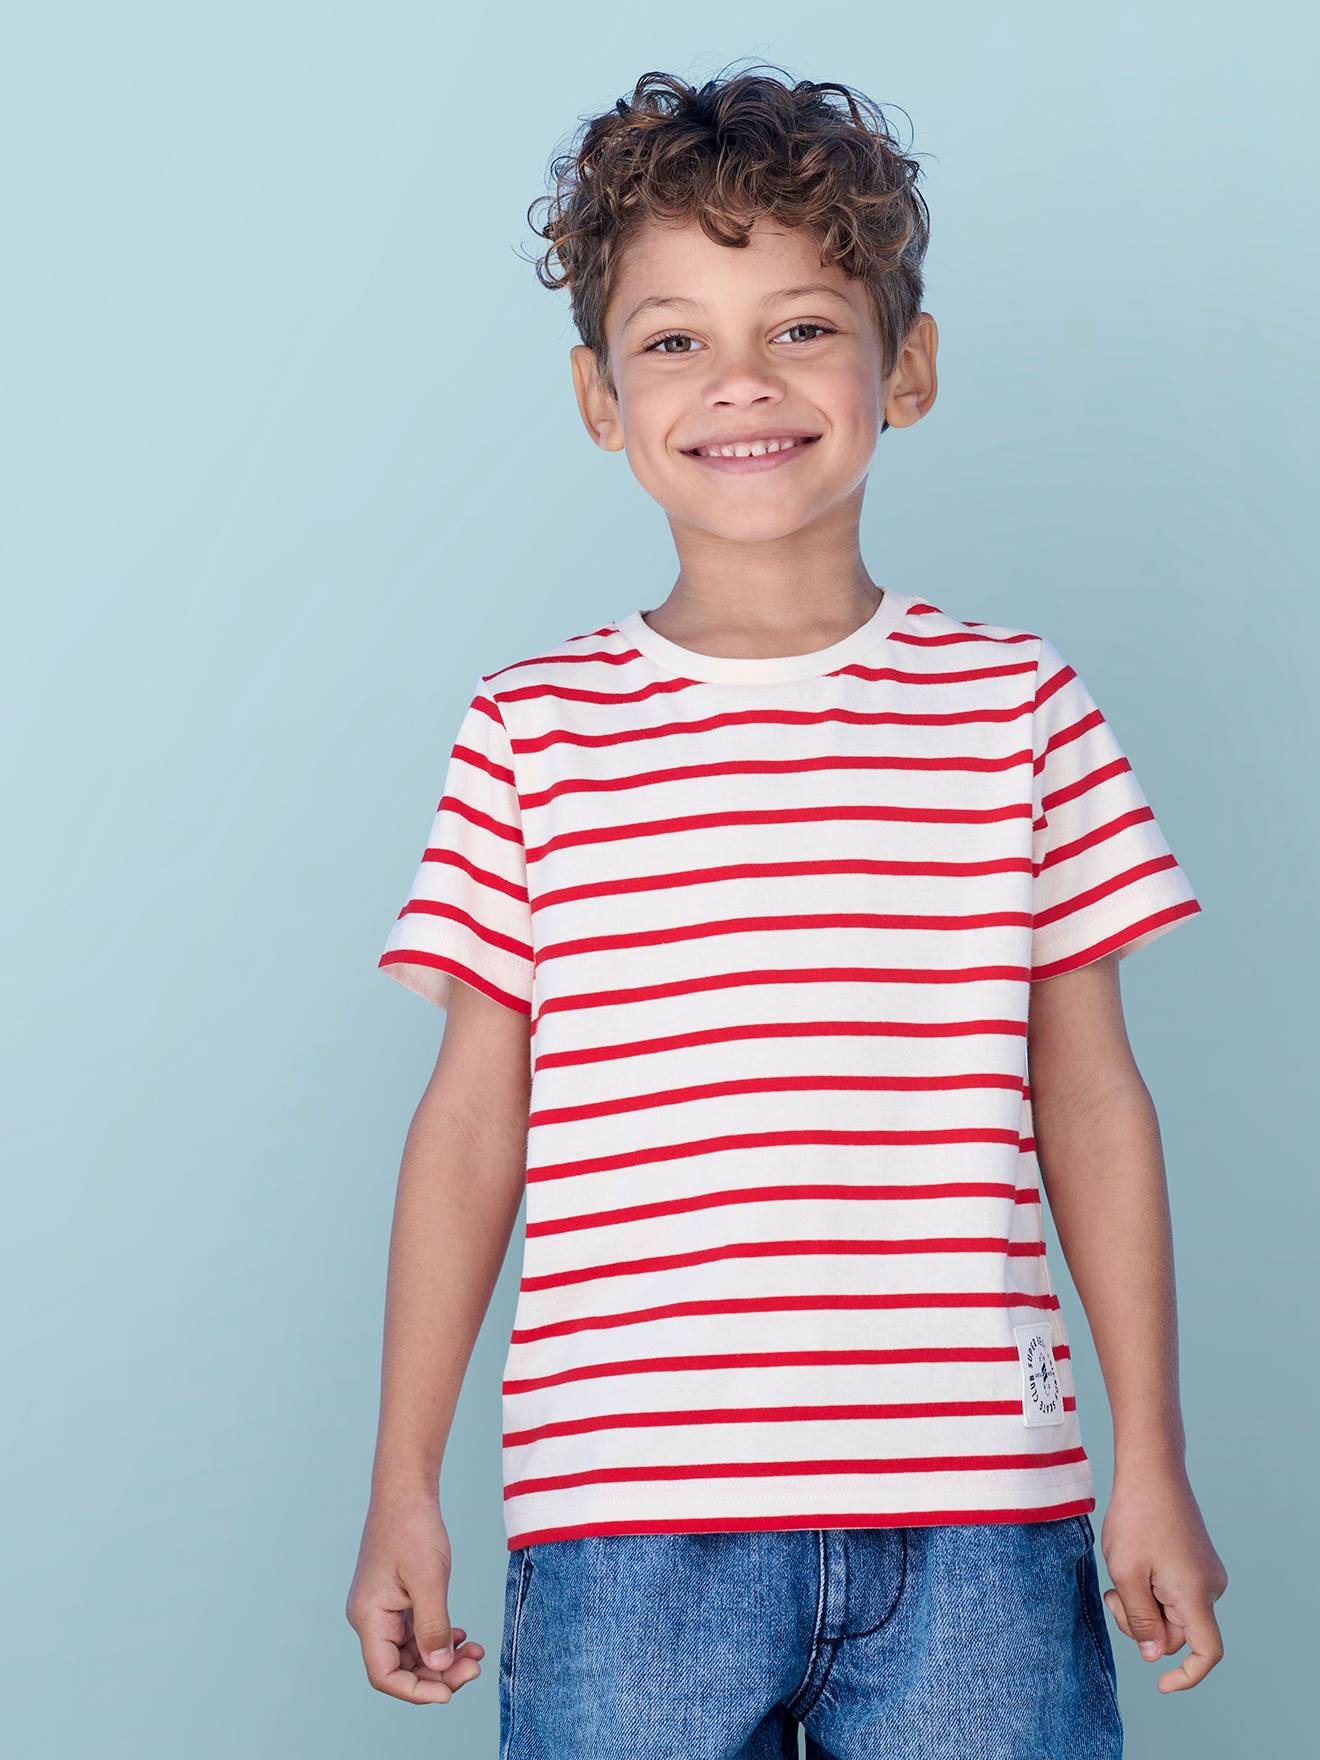 Short-Sleeved Sailor-Style T-Shirt for Boys striped red